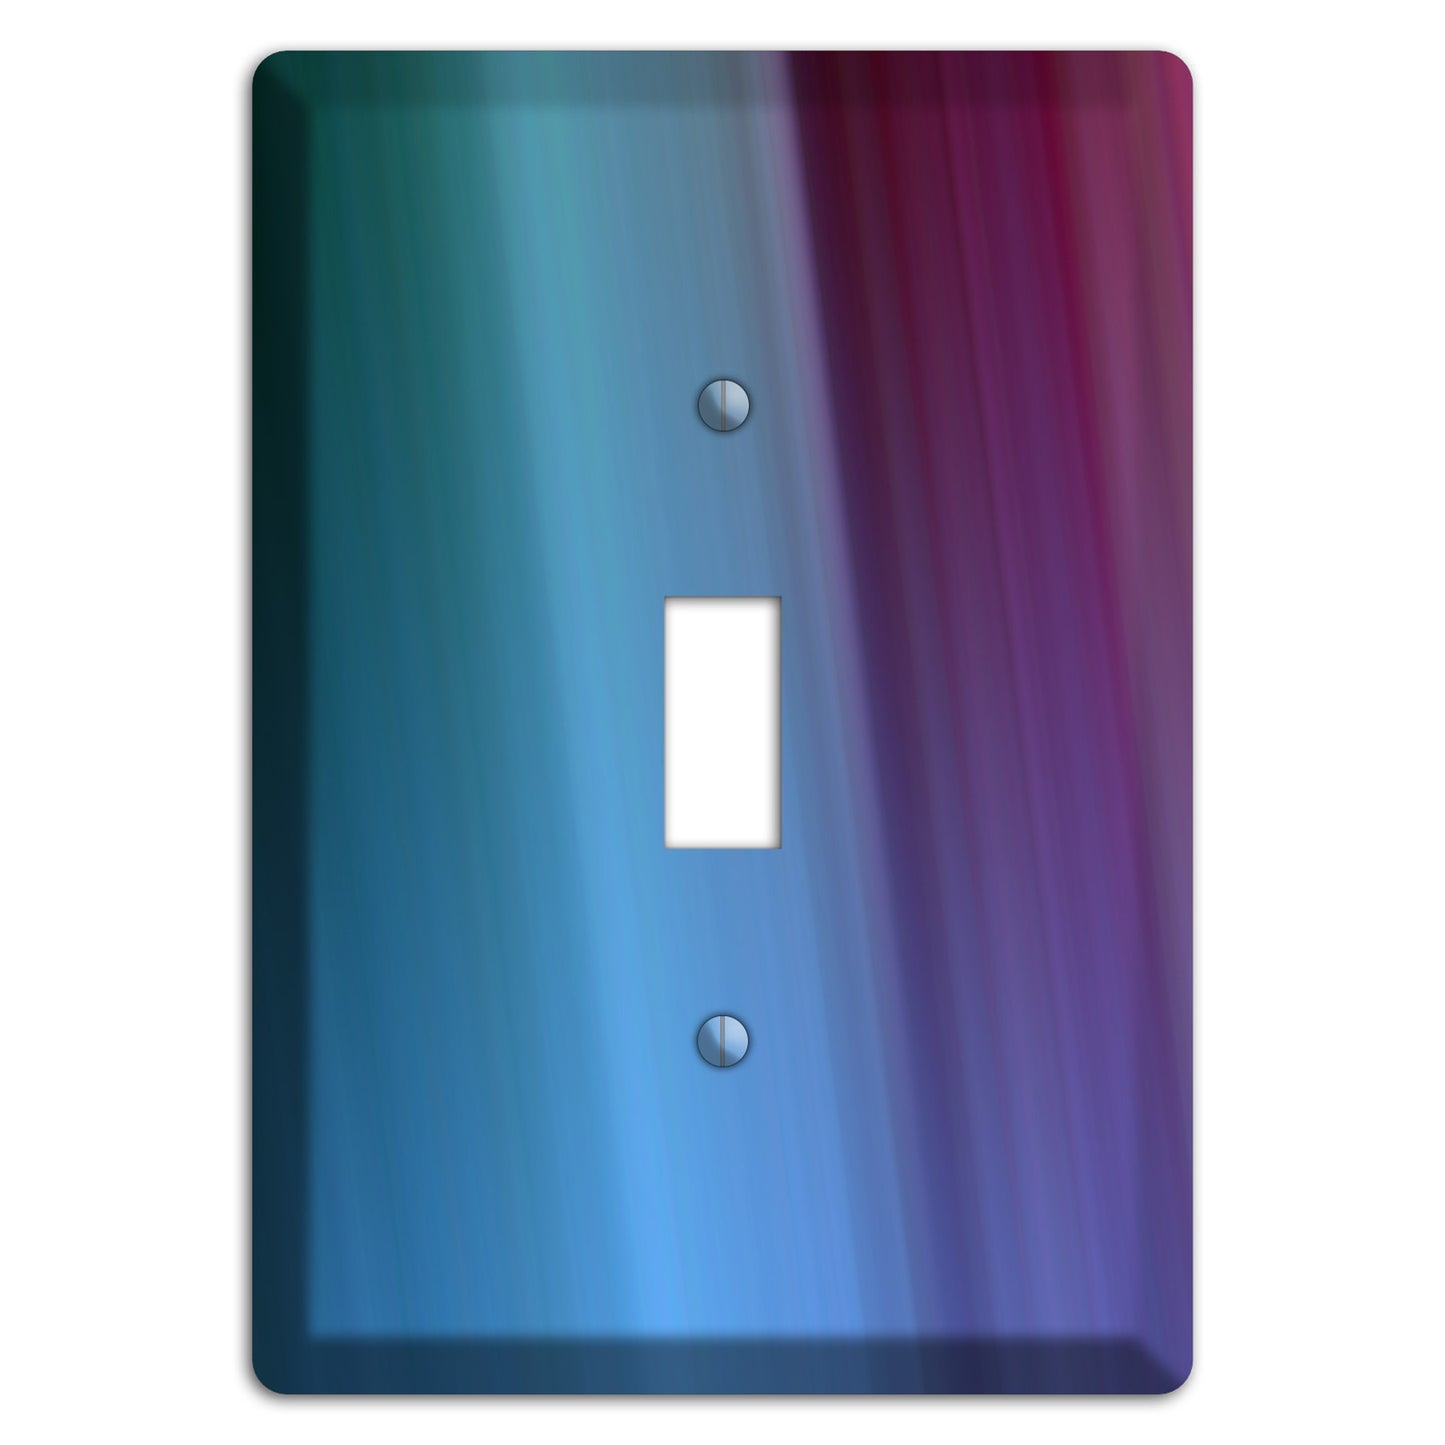 Blue and Purple Ray of Light Cover Plates